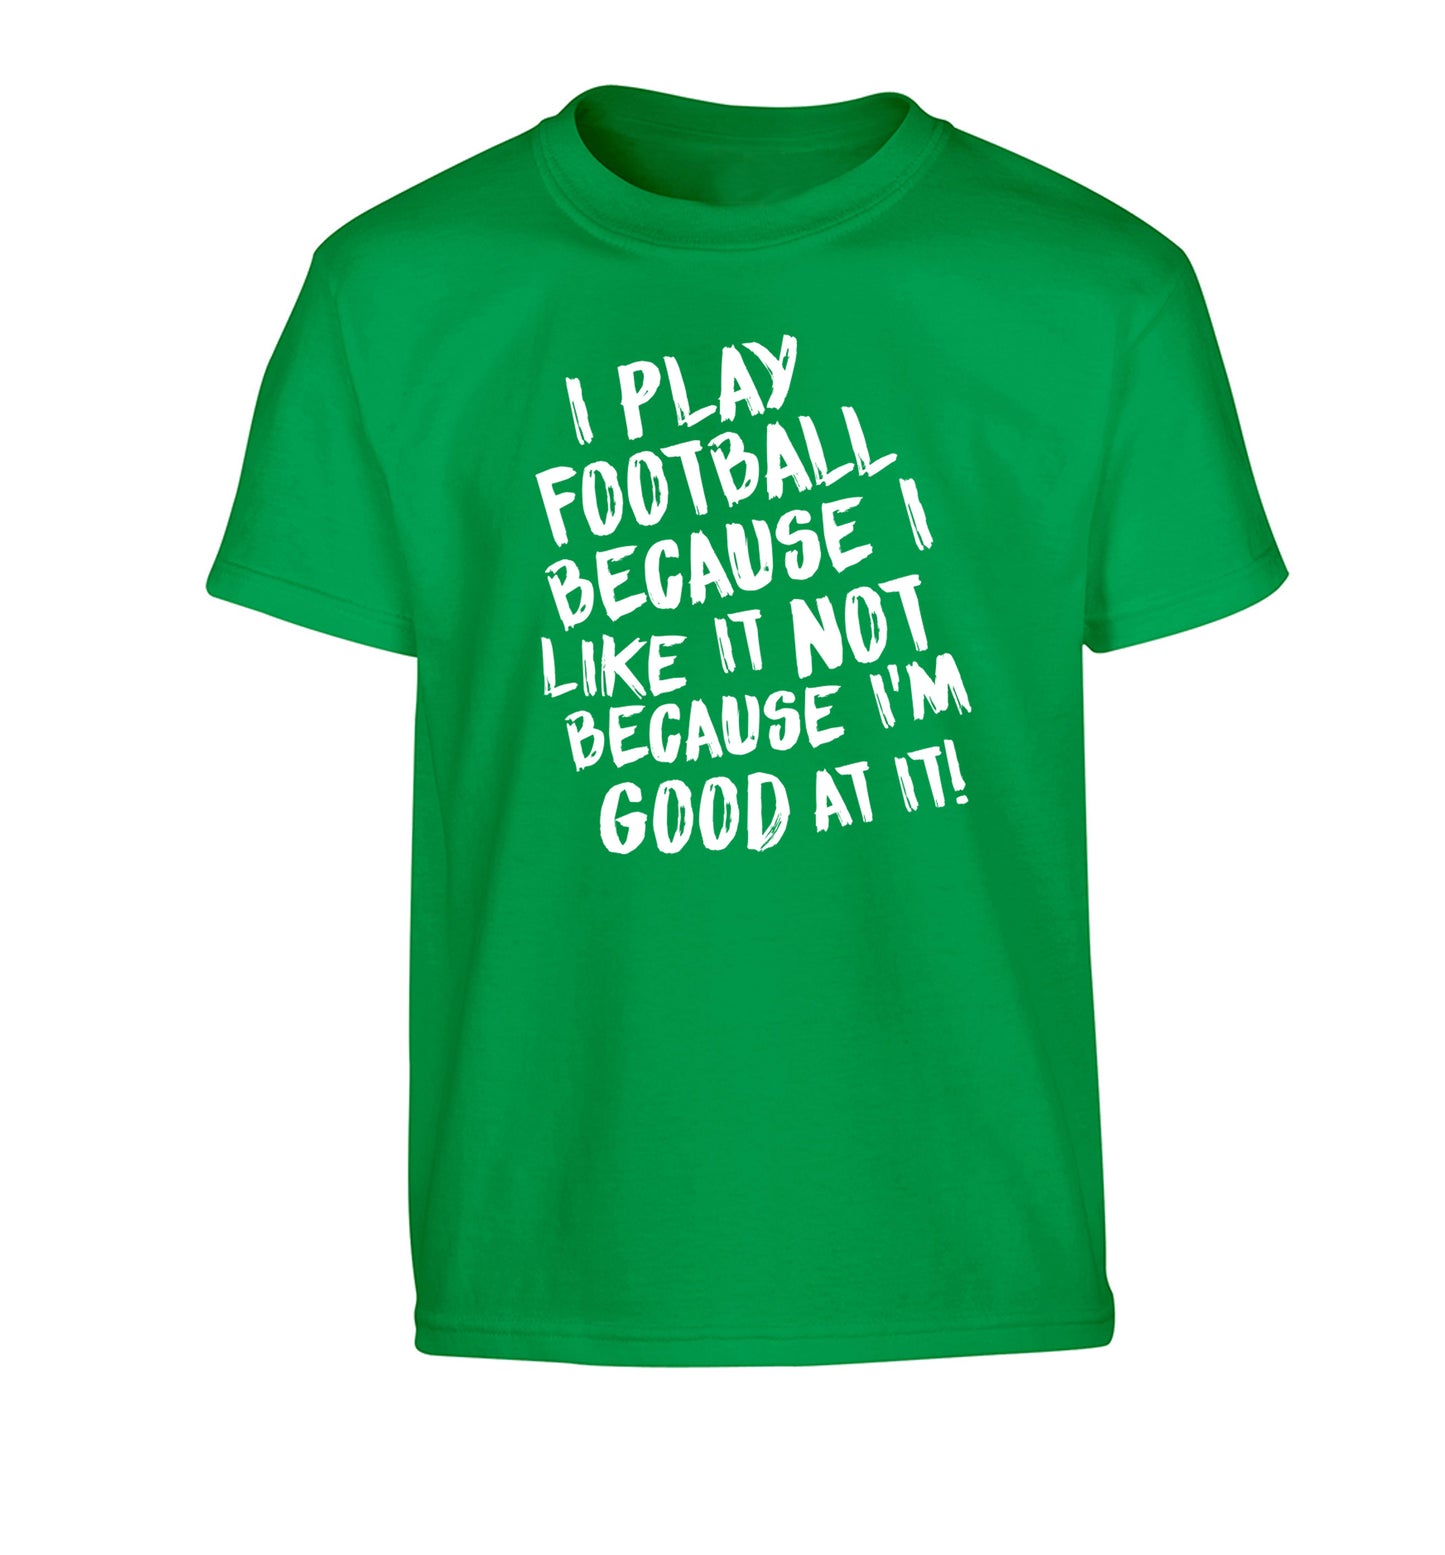 I play football because I like it not because I'm good at it Children's green Tshirt 12-14 Years